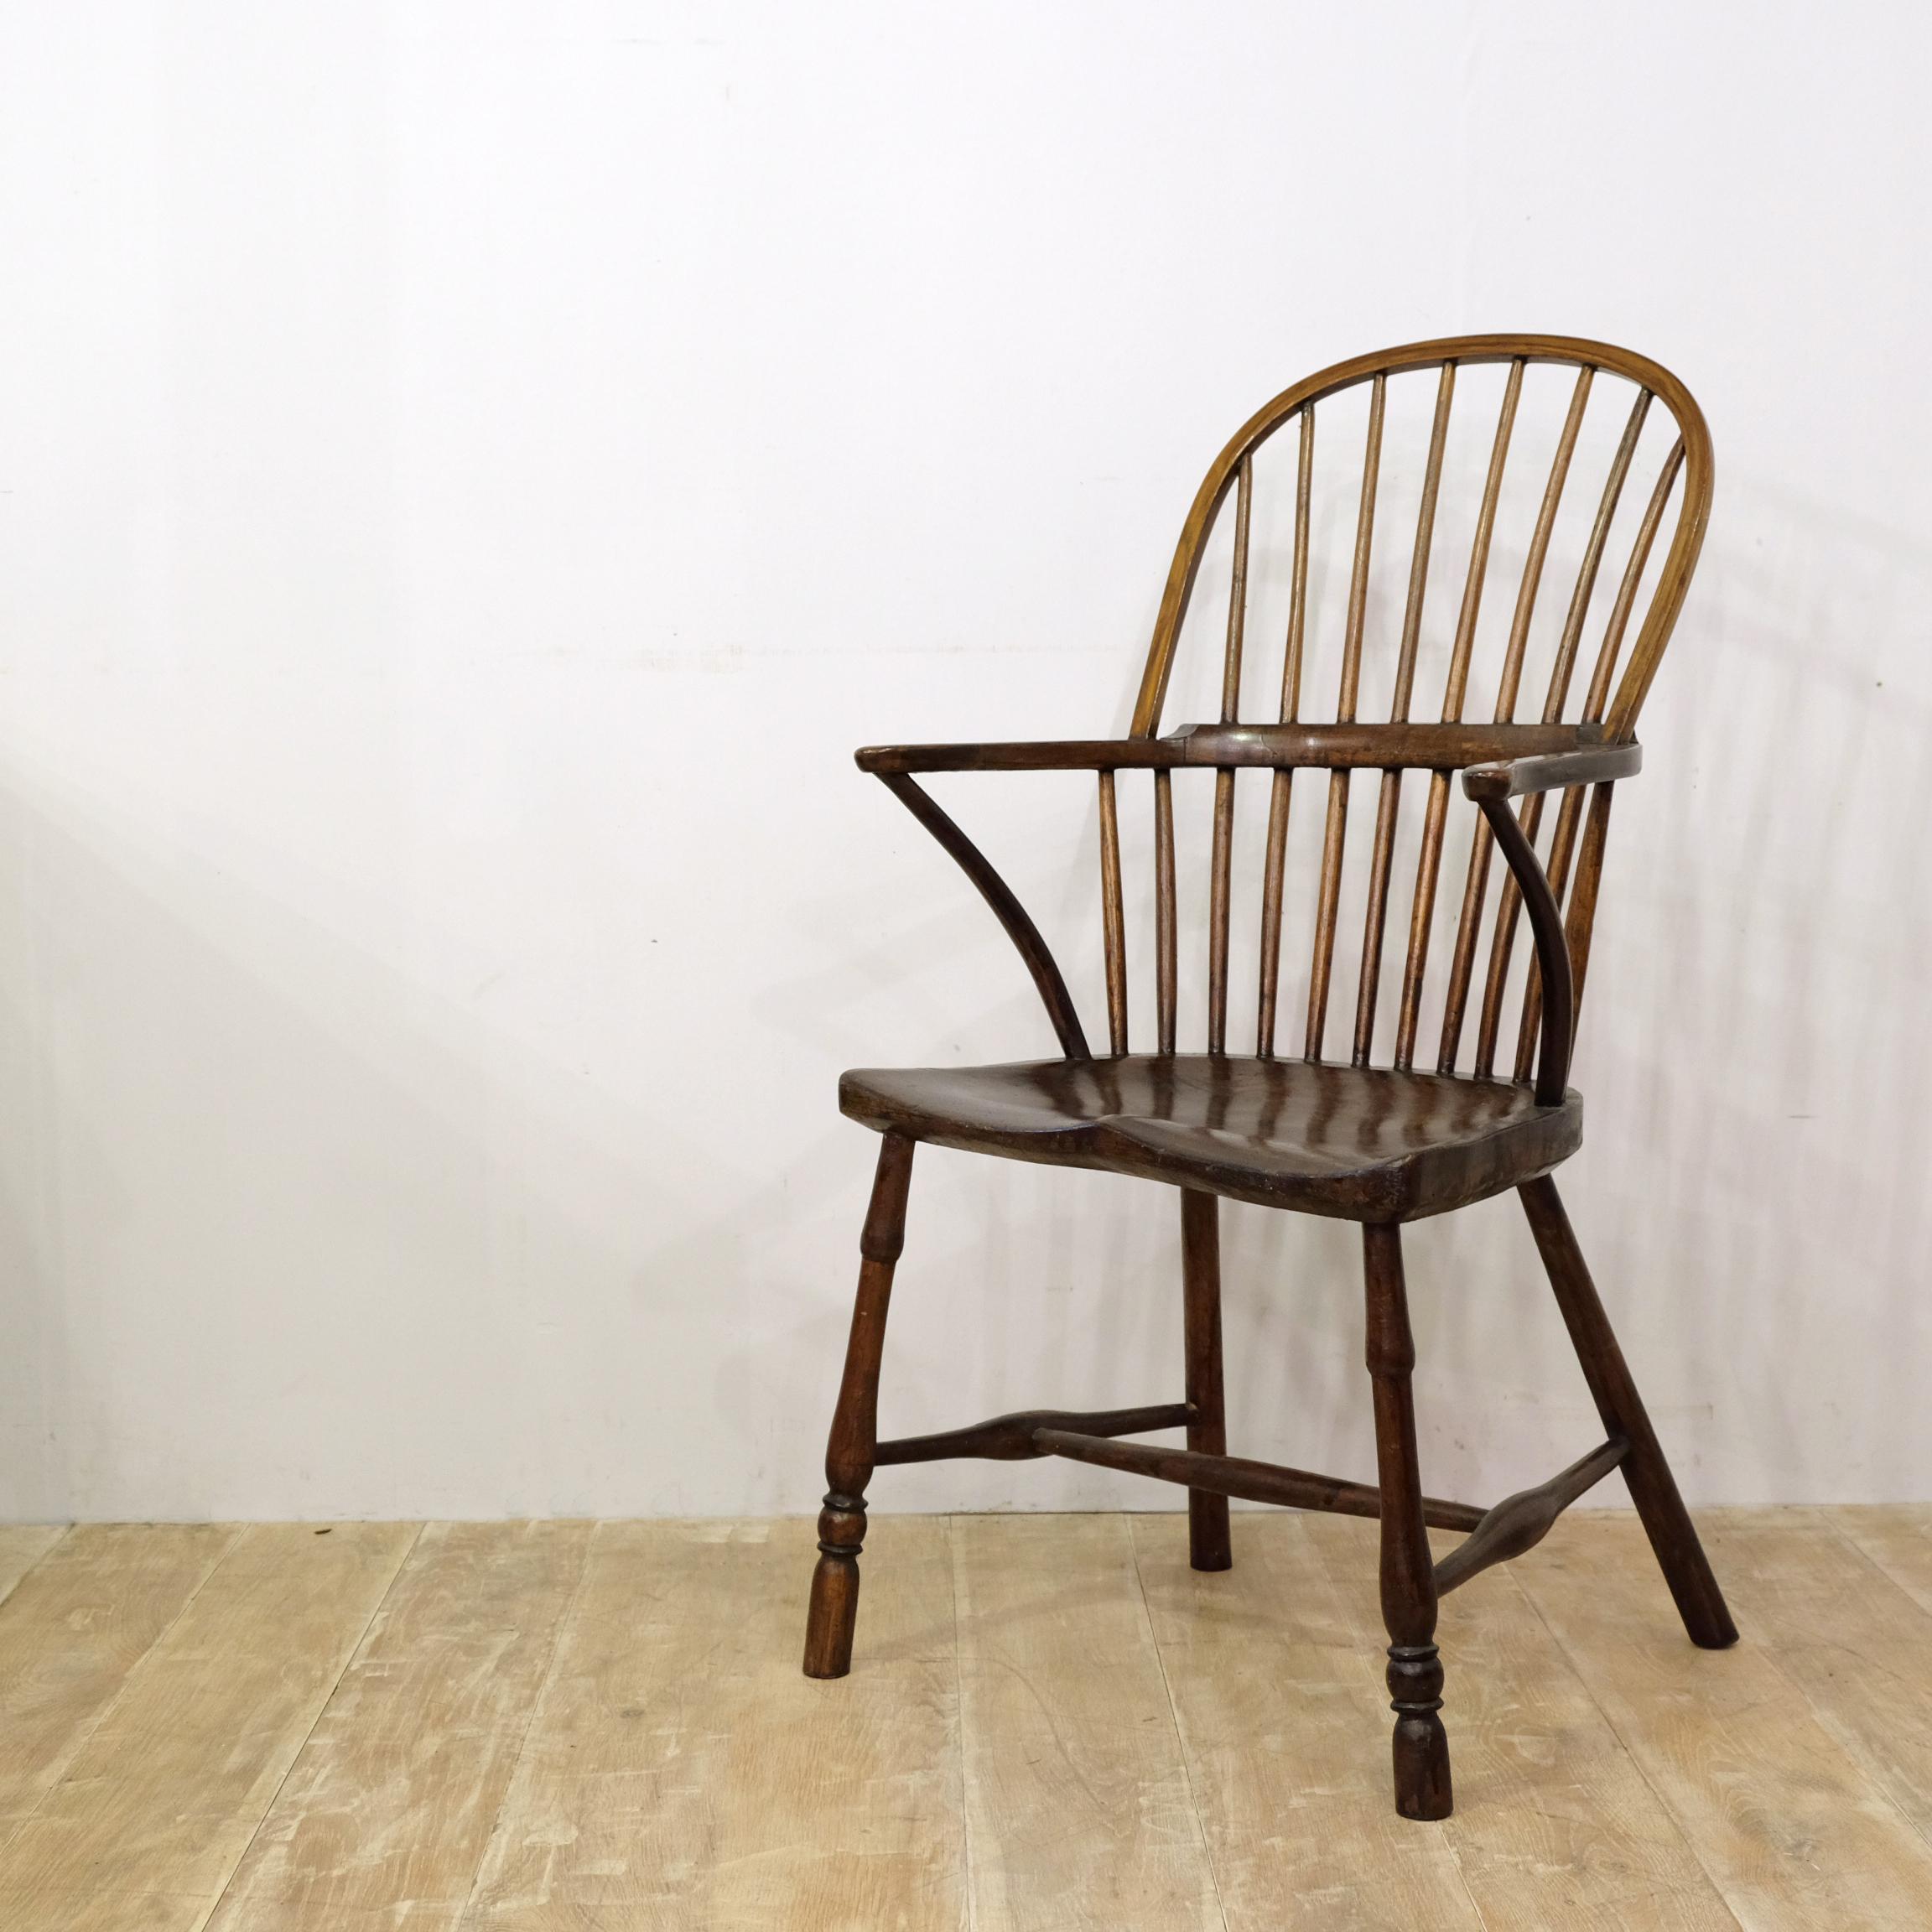 Delightful mid-19th century stickback Windsor chair. Originating from the Westcountry, most likely Cornwall, this example has the charming flat fronted shaped seat, egg and reel turned front legs with plain rear legs, hand drawn spindles and subtly